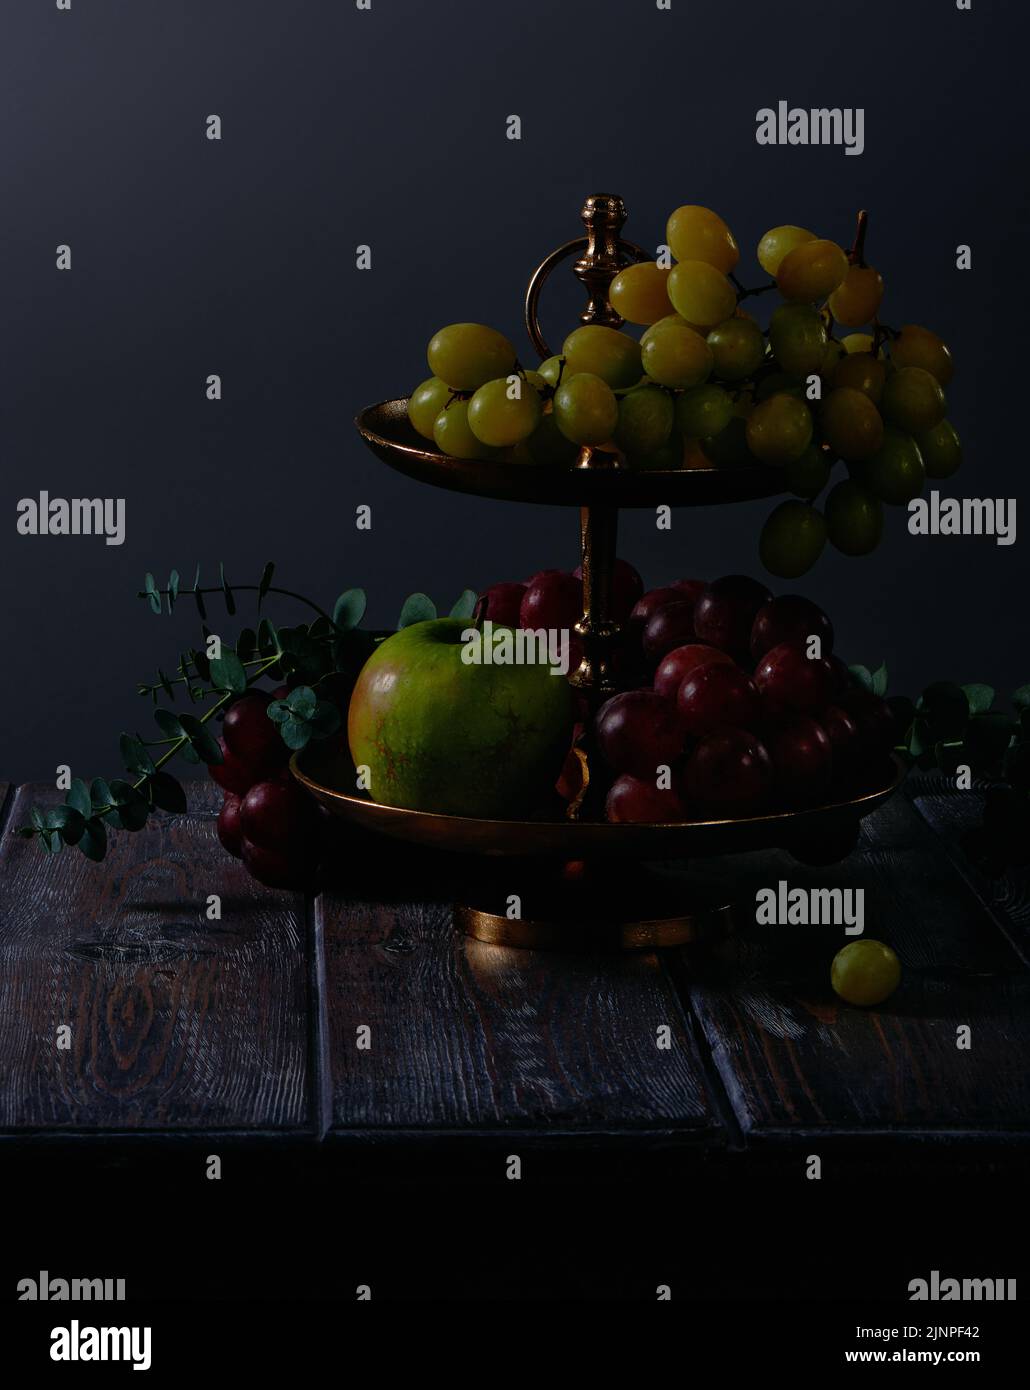 Fruit still life with grapes, apples and eucalyptus in antique copper dessert stand on dark wooden table background Stock Photo